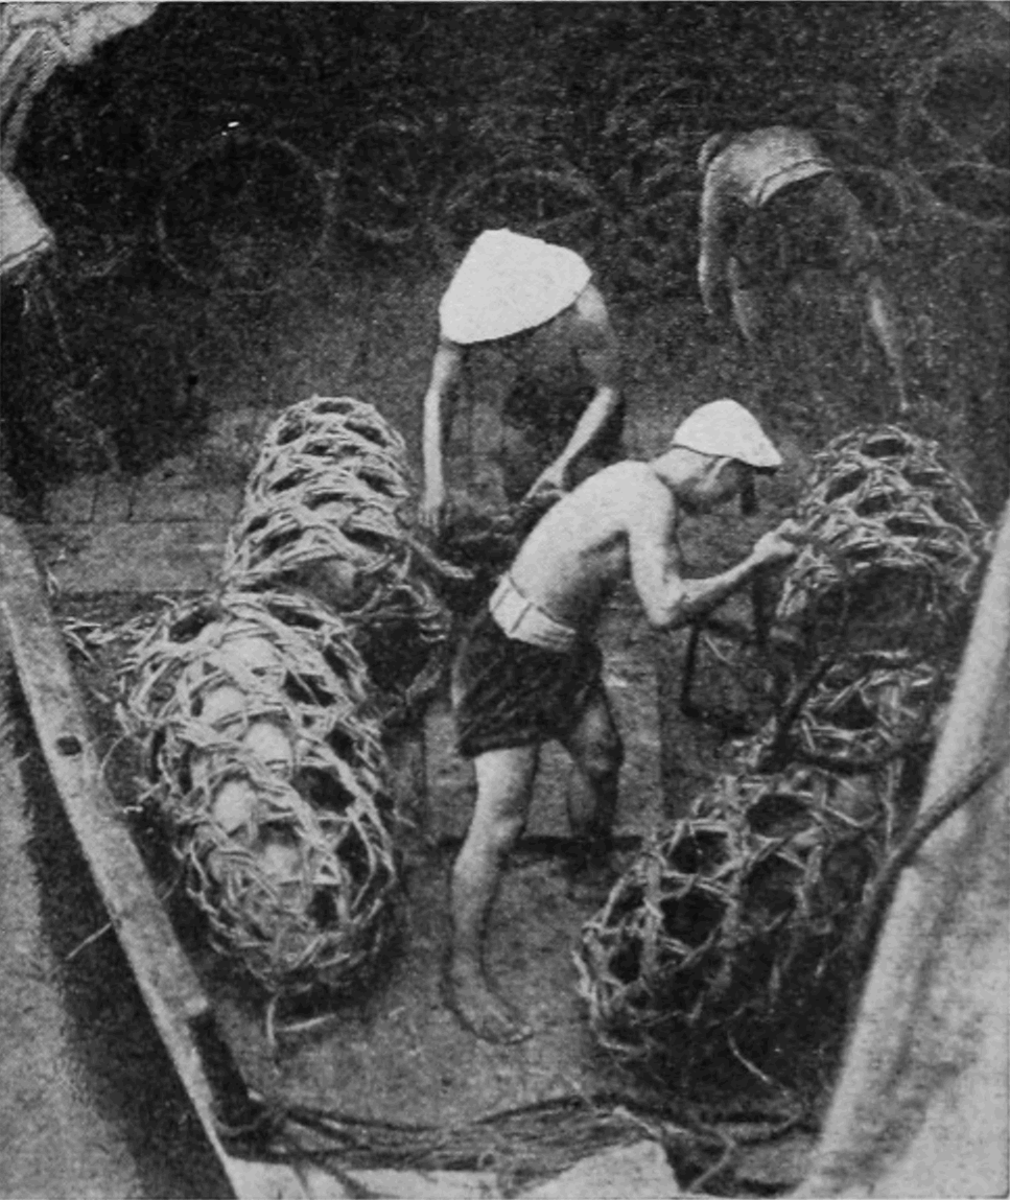 An example of the "pig baskets" that the captured allied soldiers were forced into.